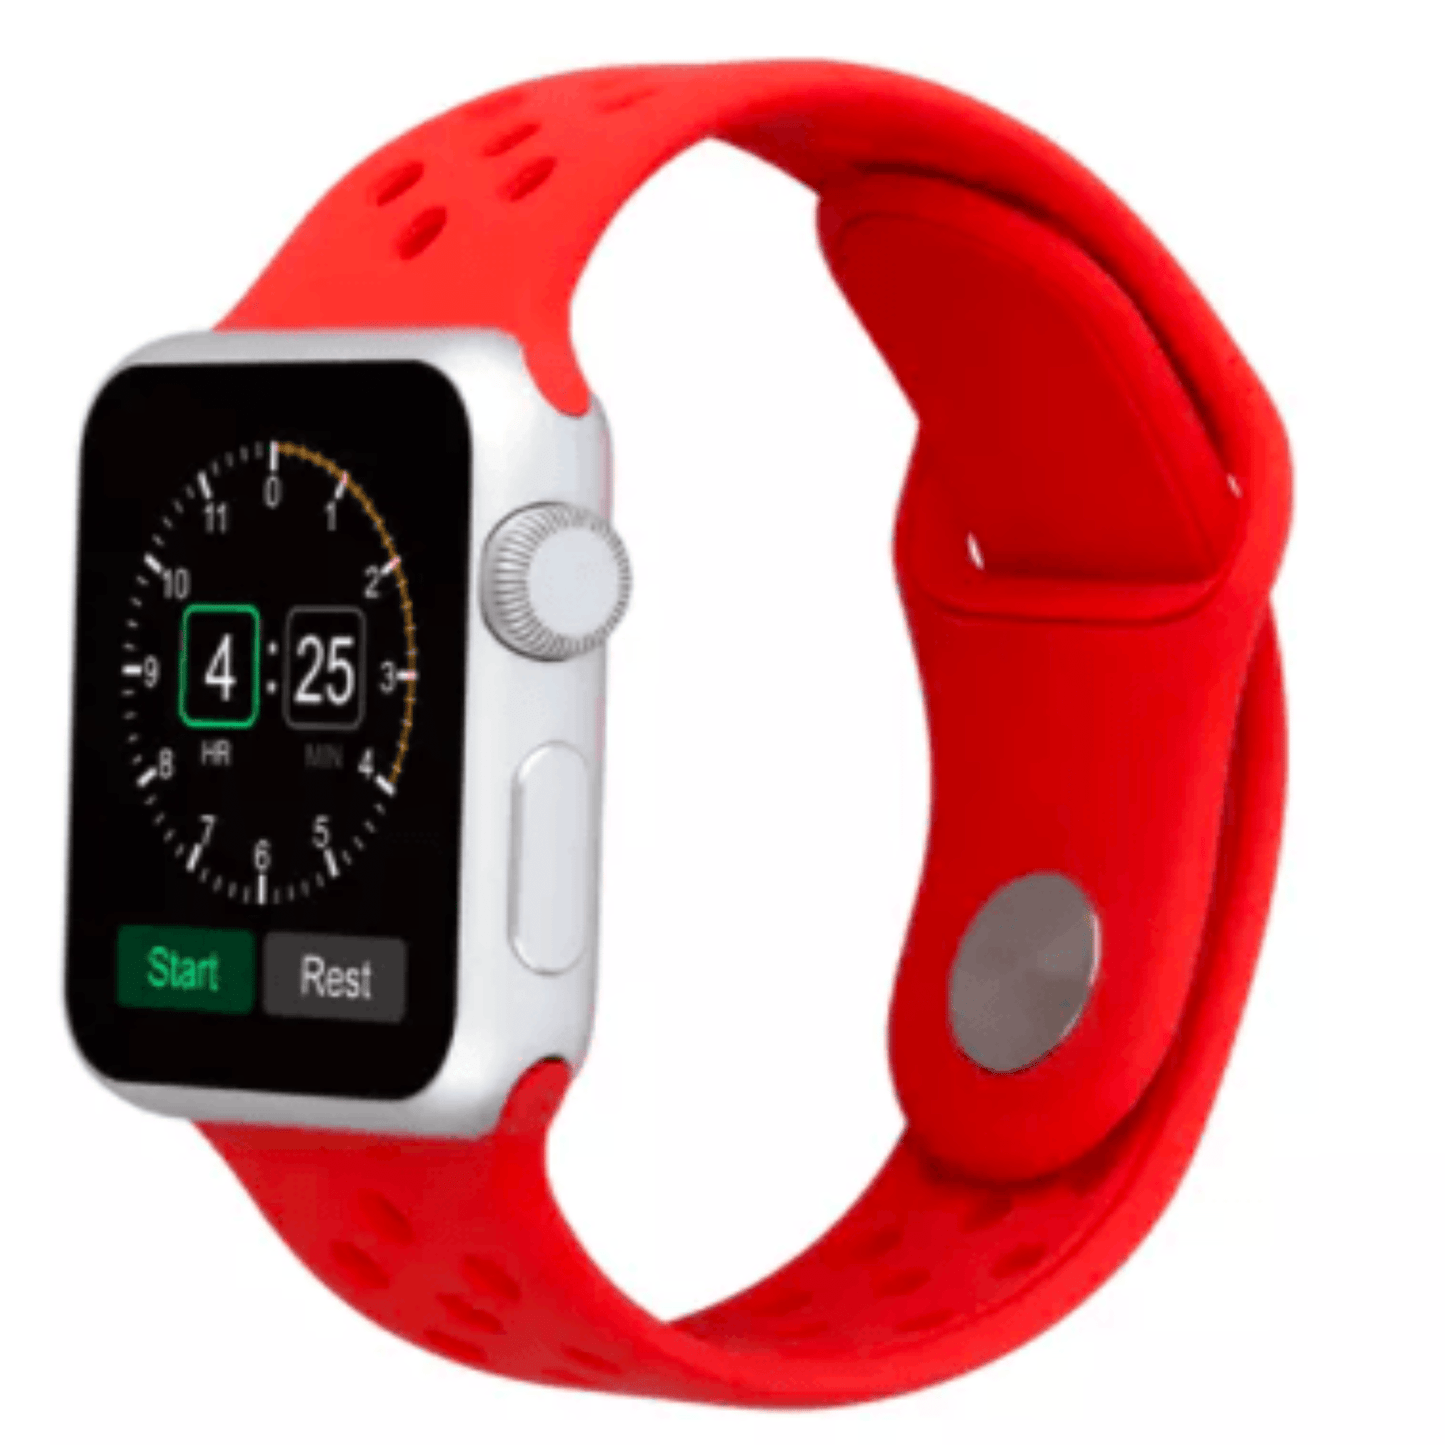 Breathable Silicone Sport Replacement Band for Apple Watch Red Apple Watch Band Elements Watches